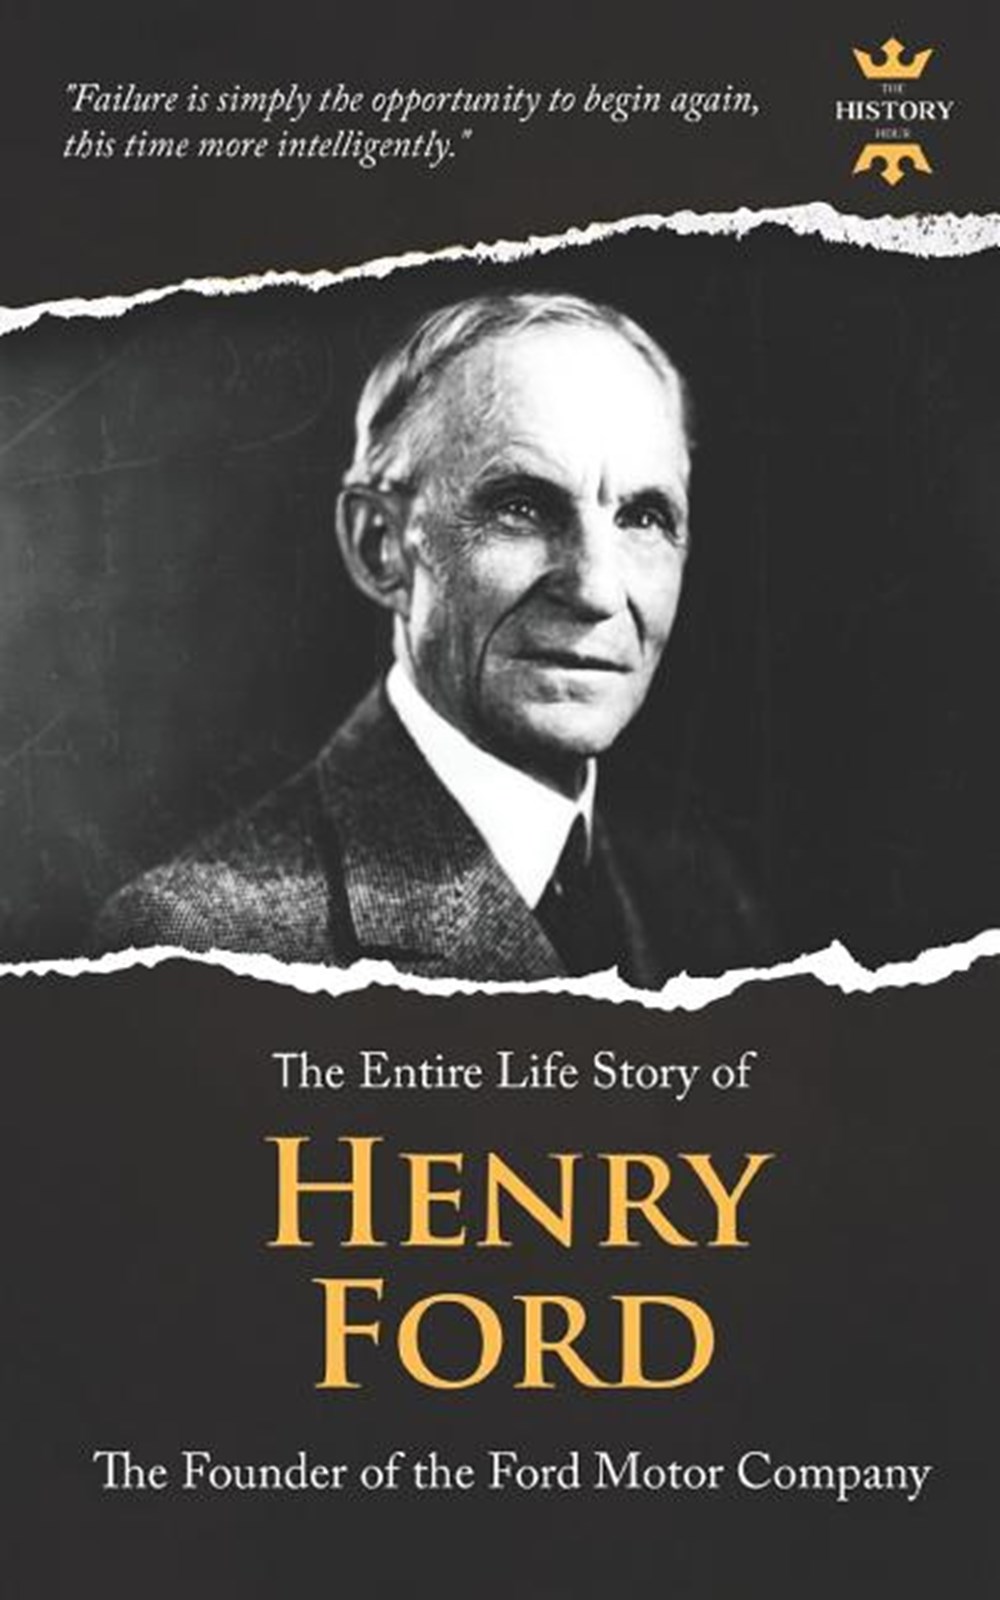 Henry Ford A Business Genius. The Entire Life Story